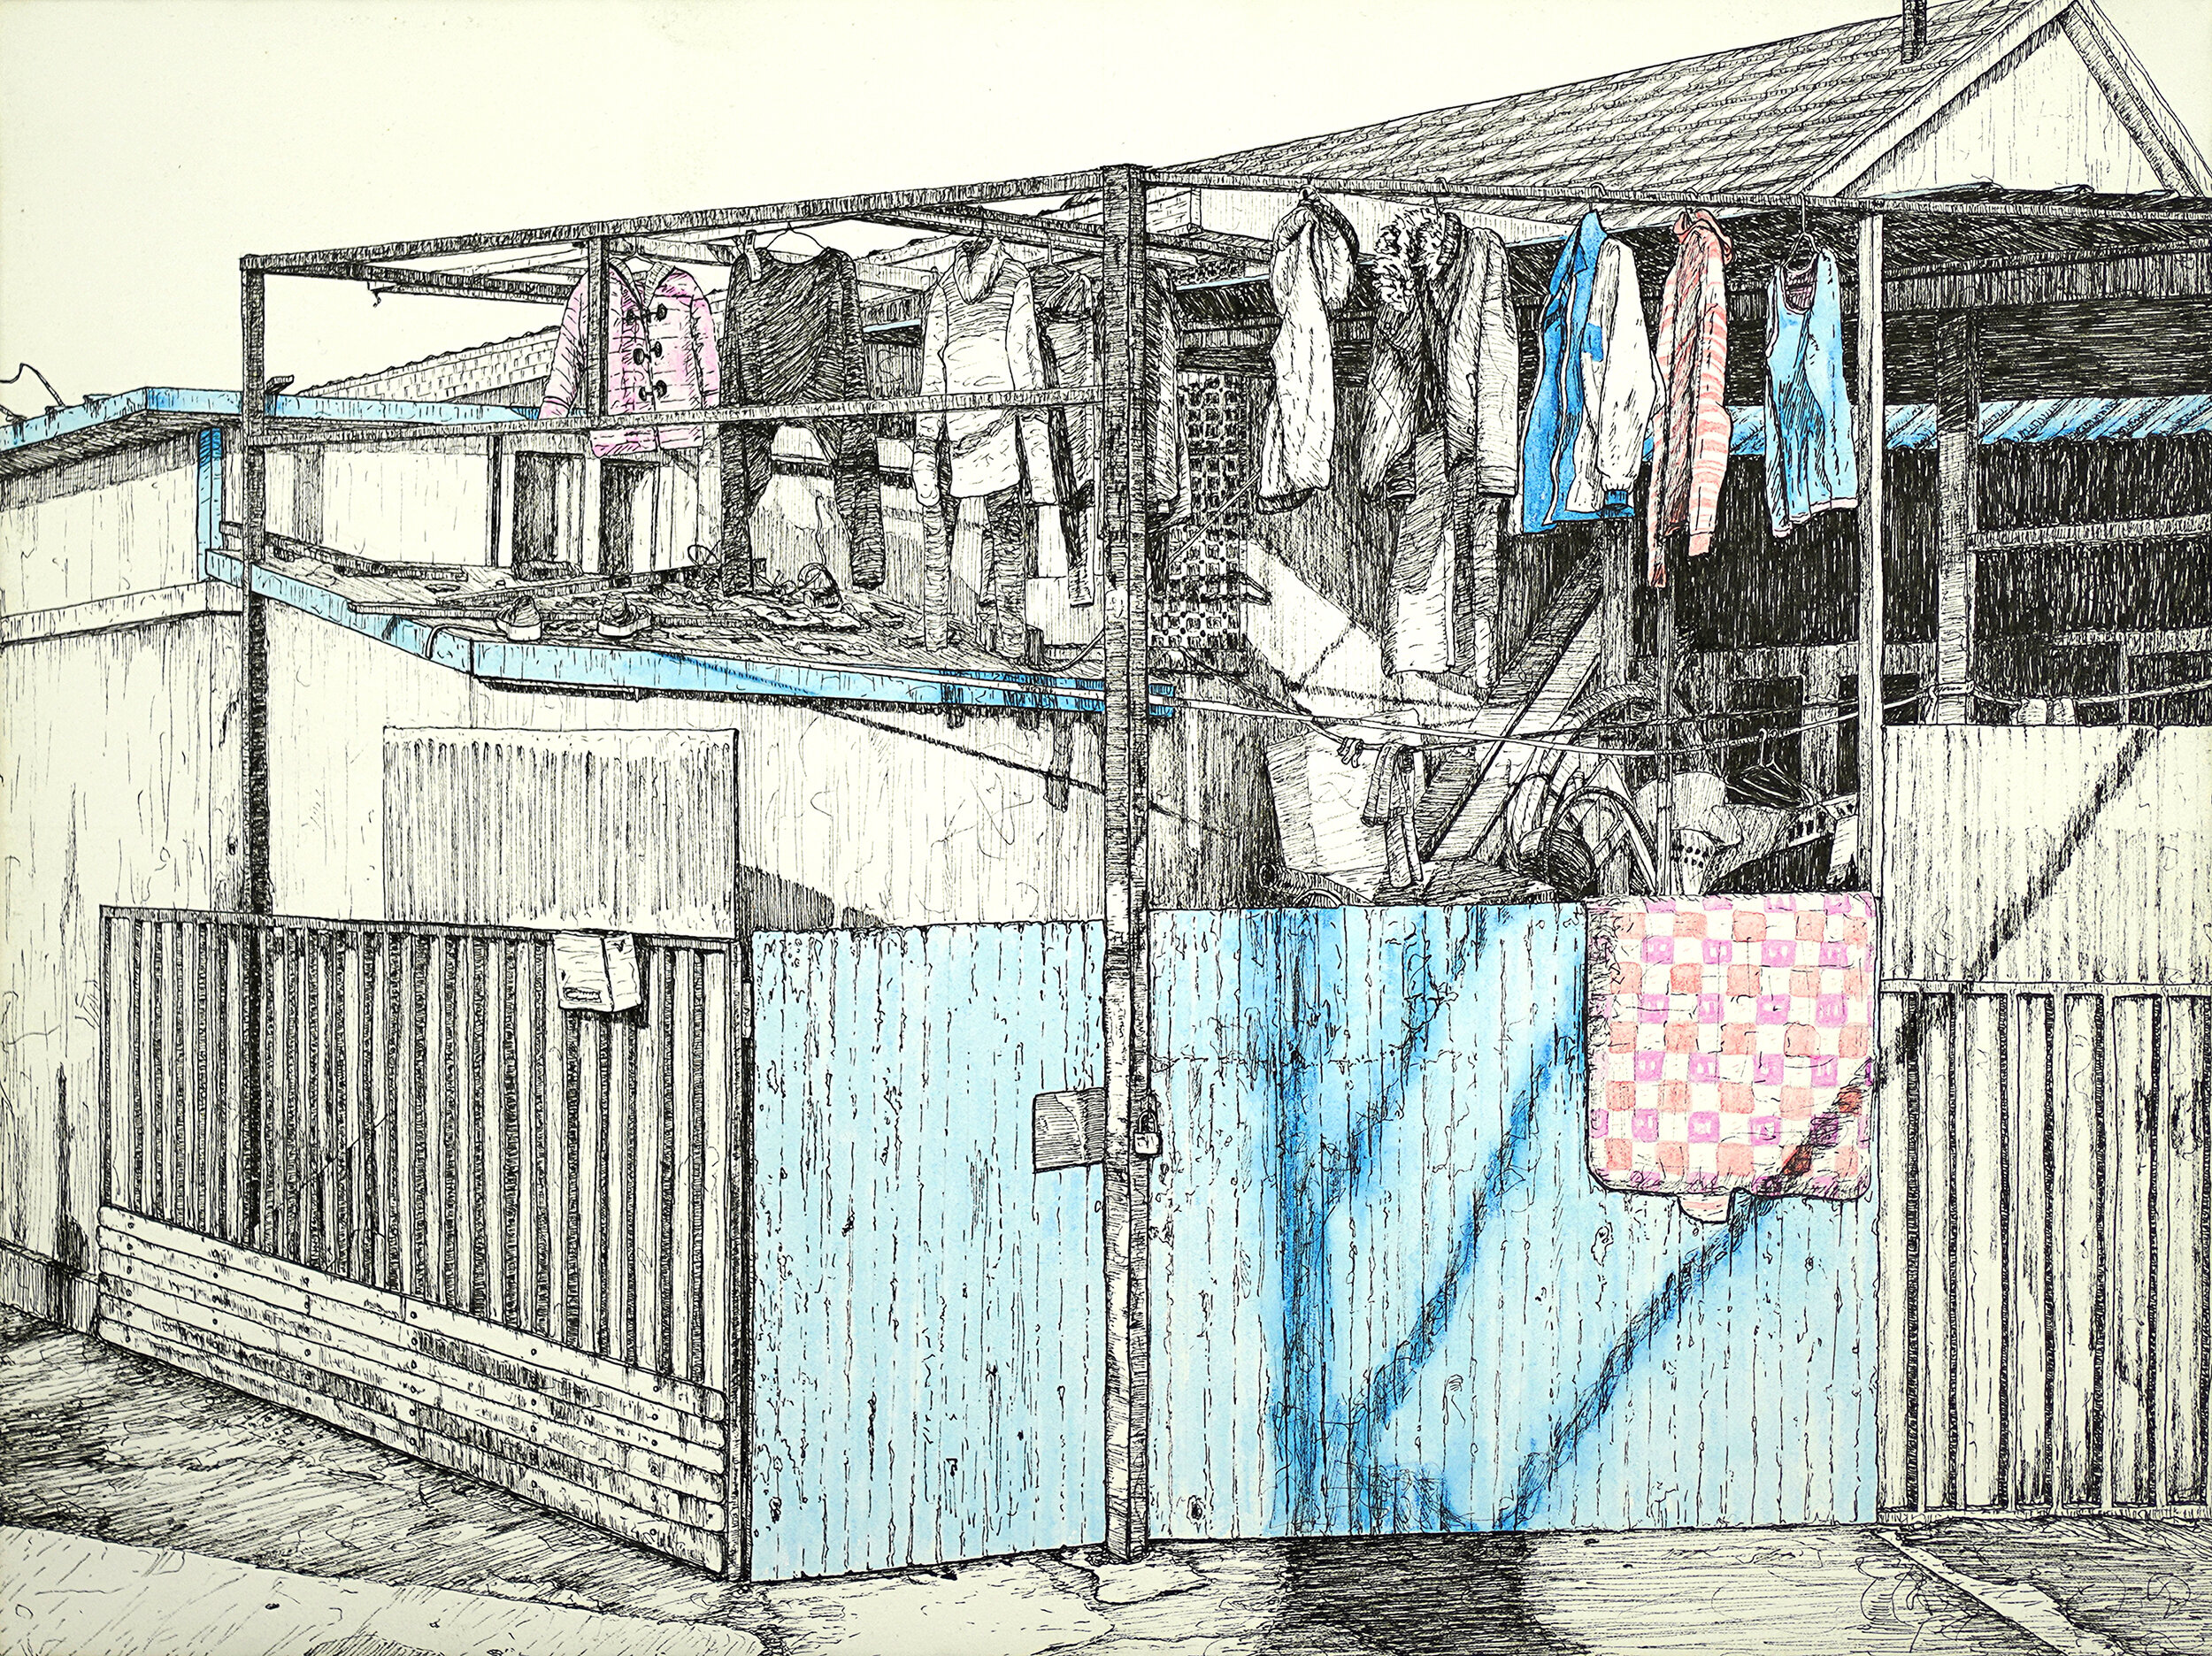   Drying Clothes , 2020, ink and watercolor pencil on paper, 30 x 40 cm 